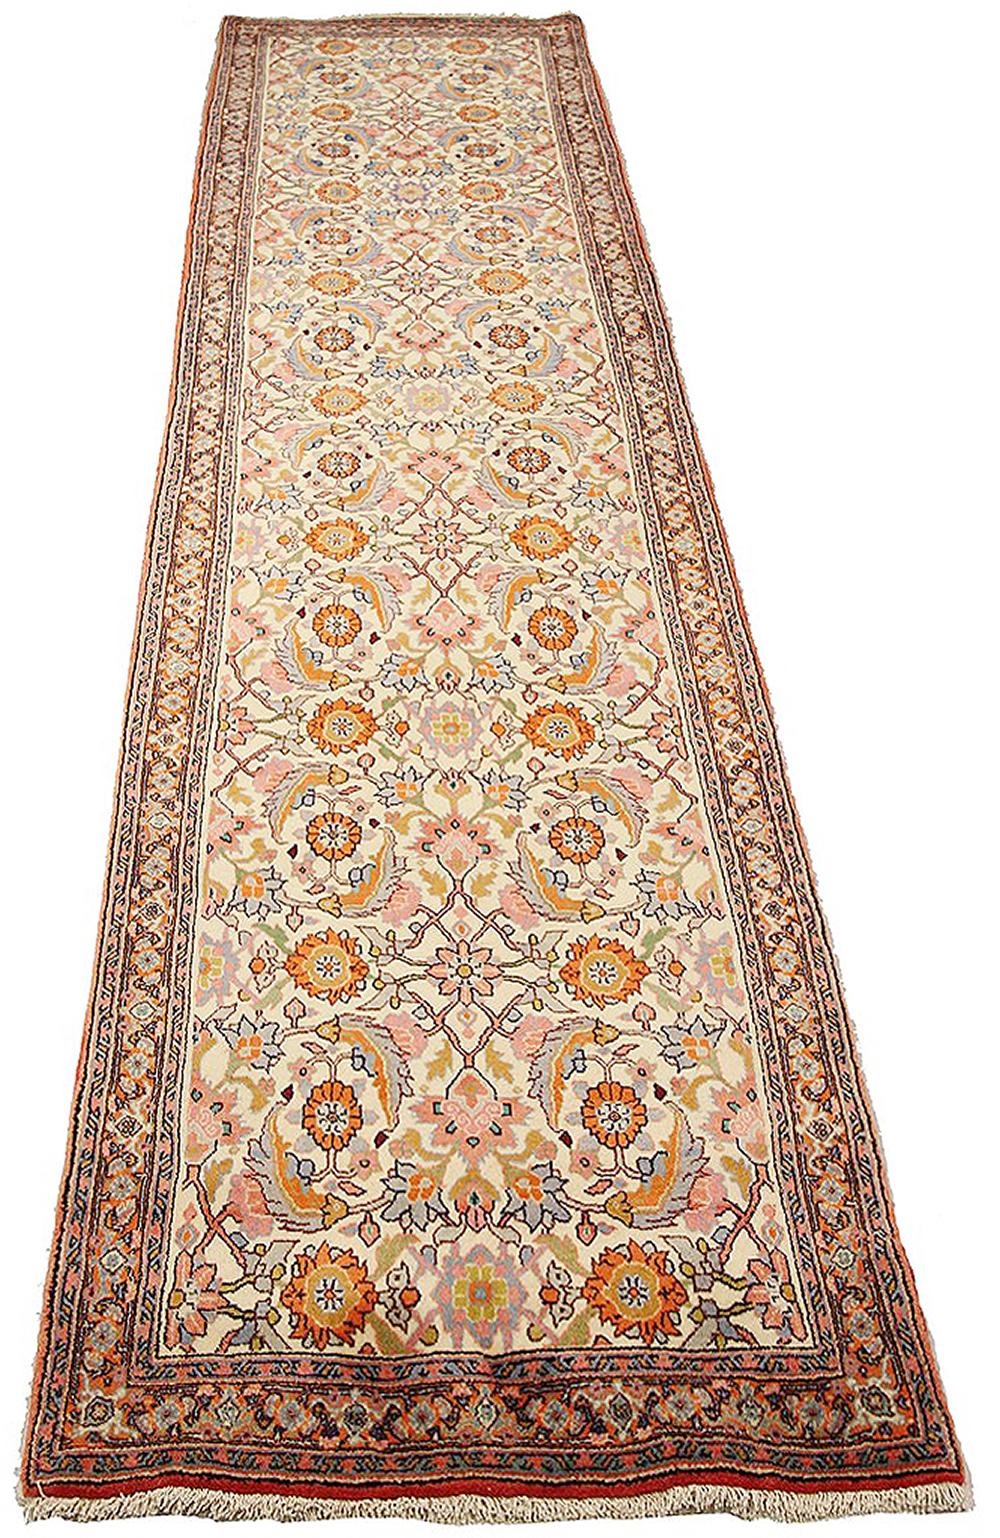 Vintage Persian runner rug handwoven from the finest sheep’s wool and colored with all-natural vegetable dyes that are safe for humans and pets. It’s a traditional Bijar design featuring lovely colors of pink, gray, and beige. It has all-over rows